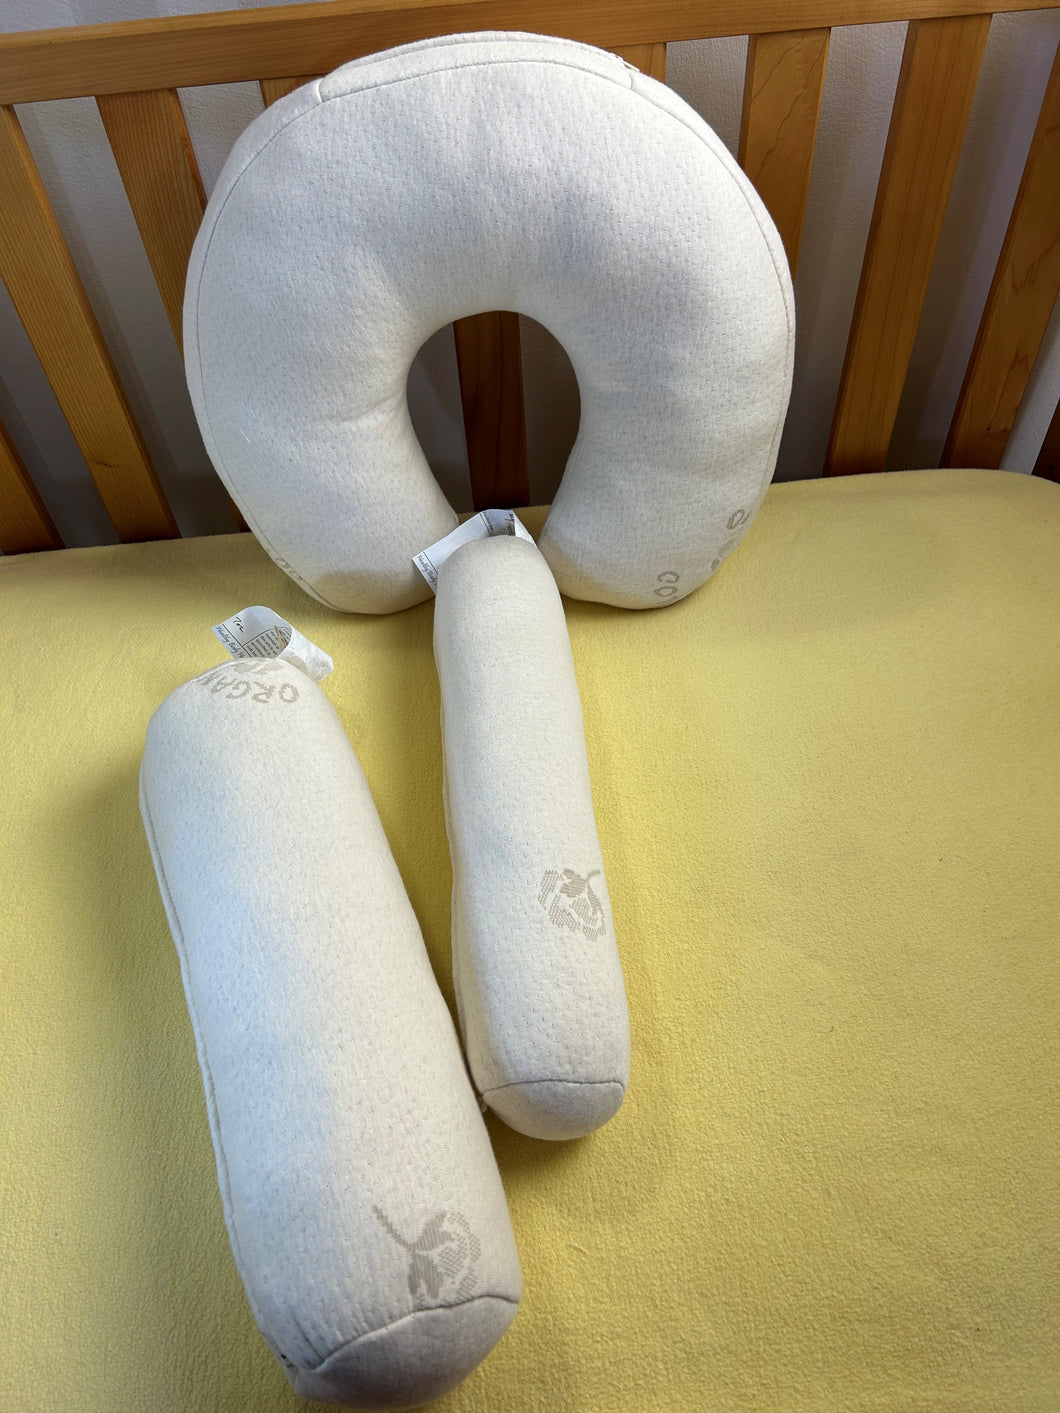 Yoga and Neck Woollie Ball Filled Organic Cotton Pillows